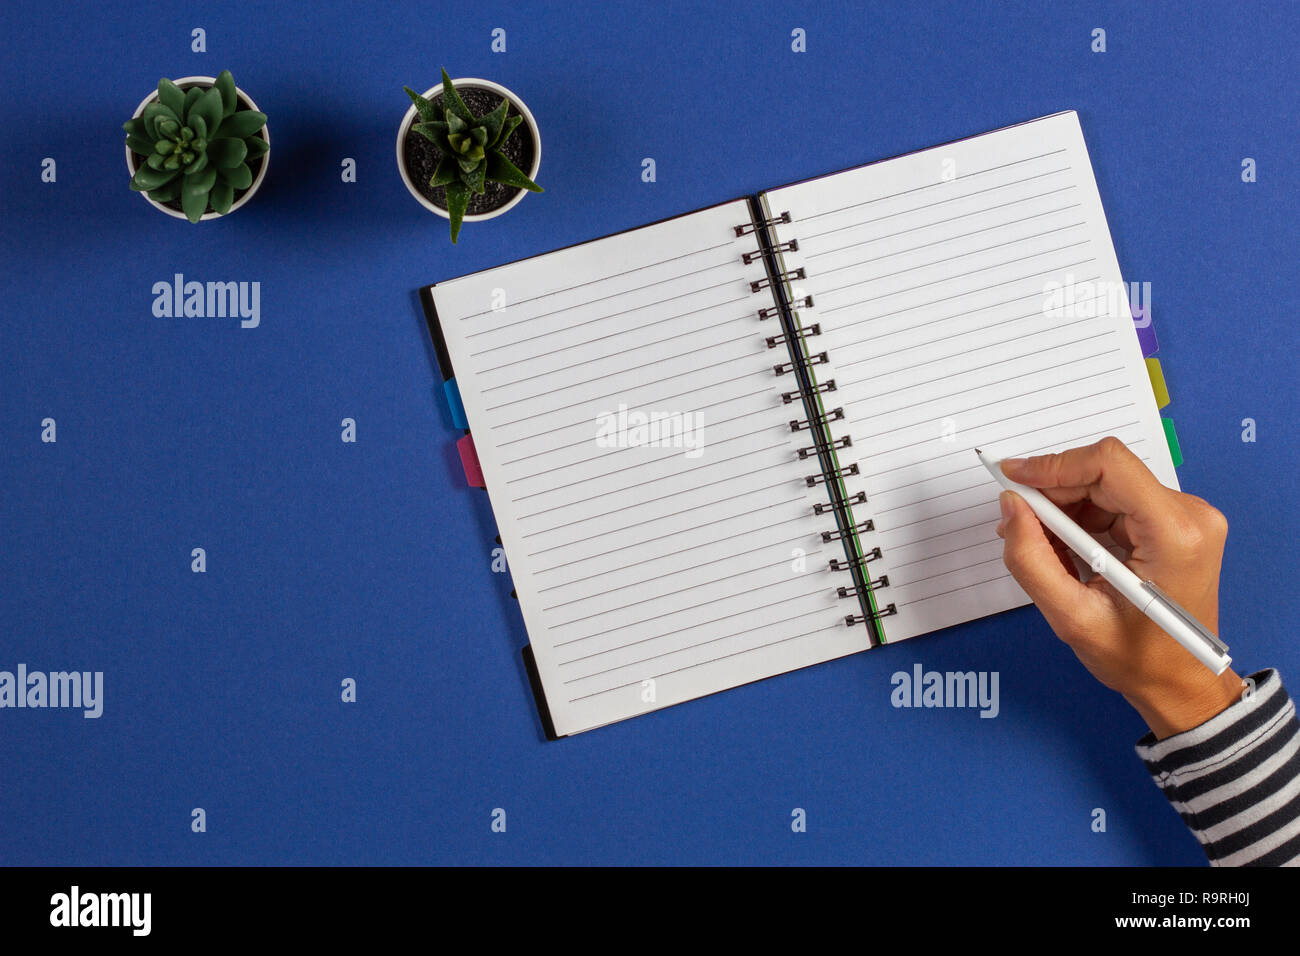 Girl hand writing with pen in diary notebook over blue background. Stock Photo